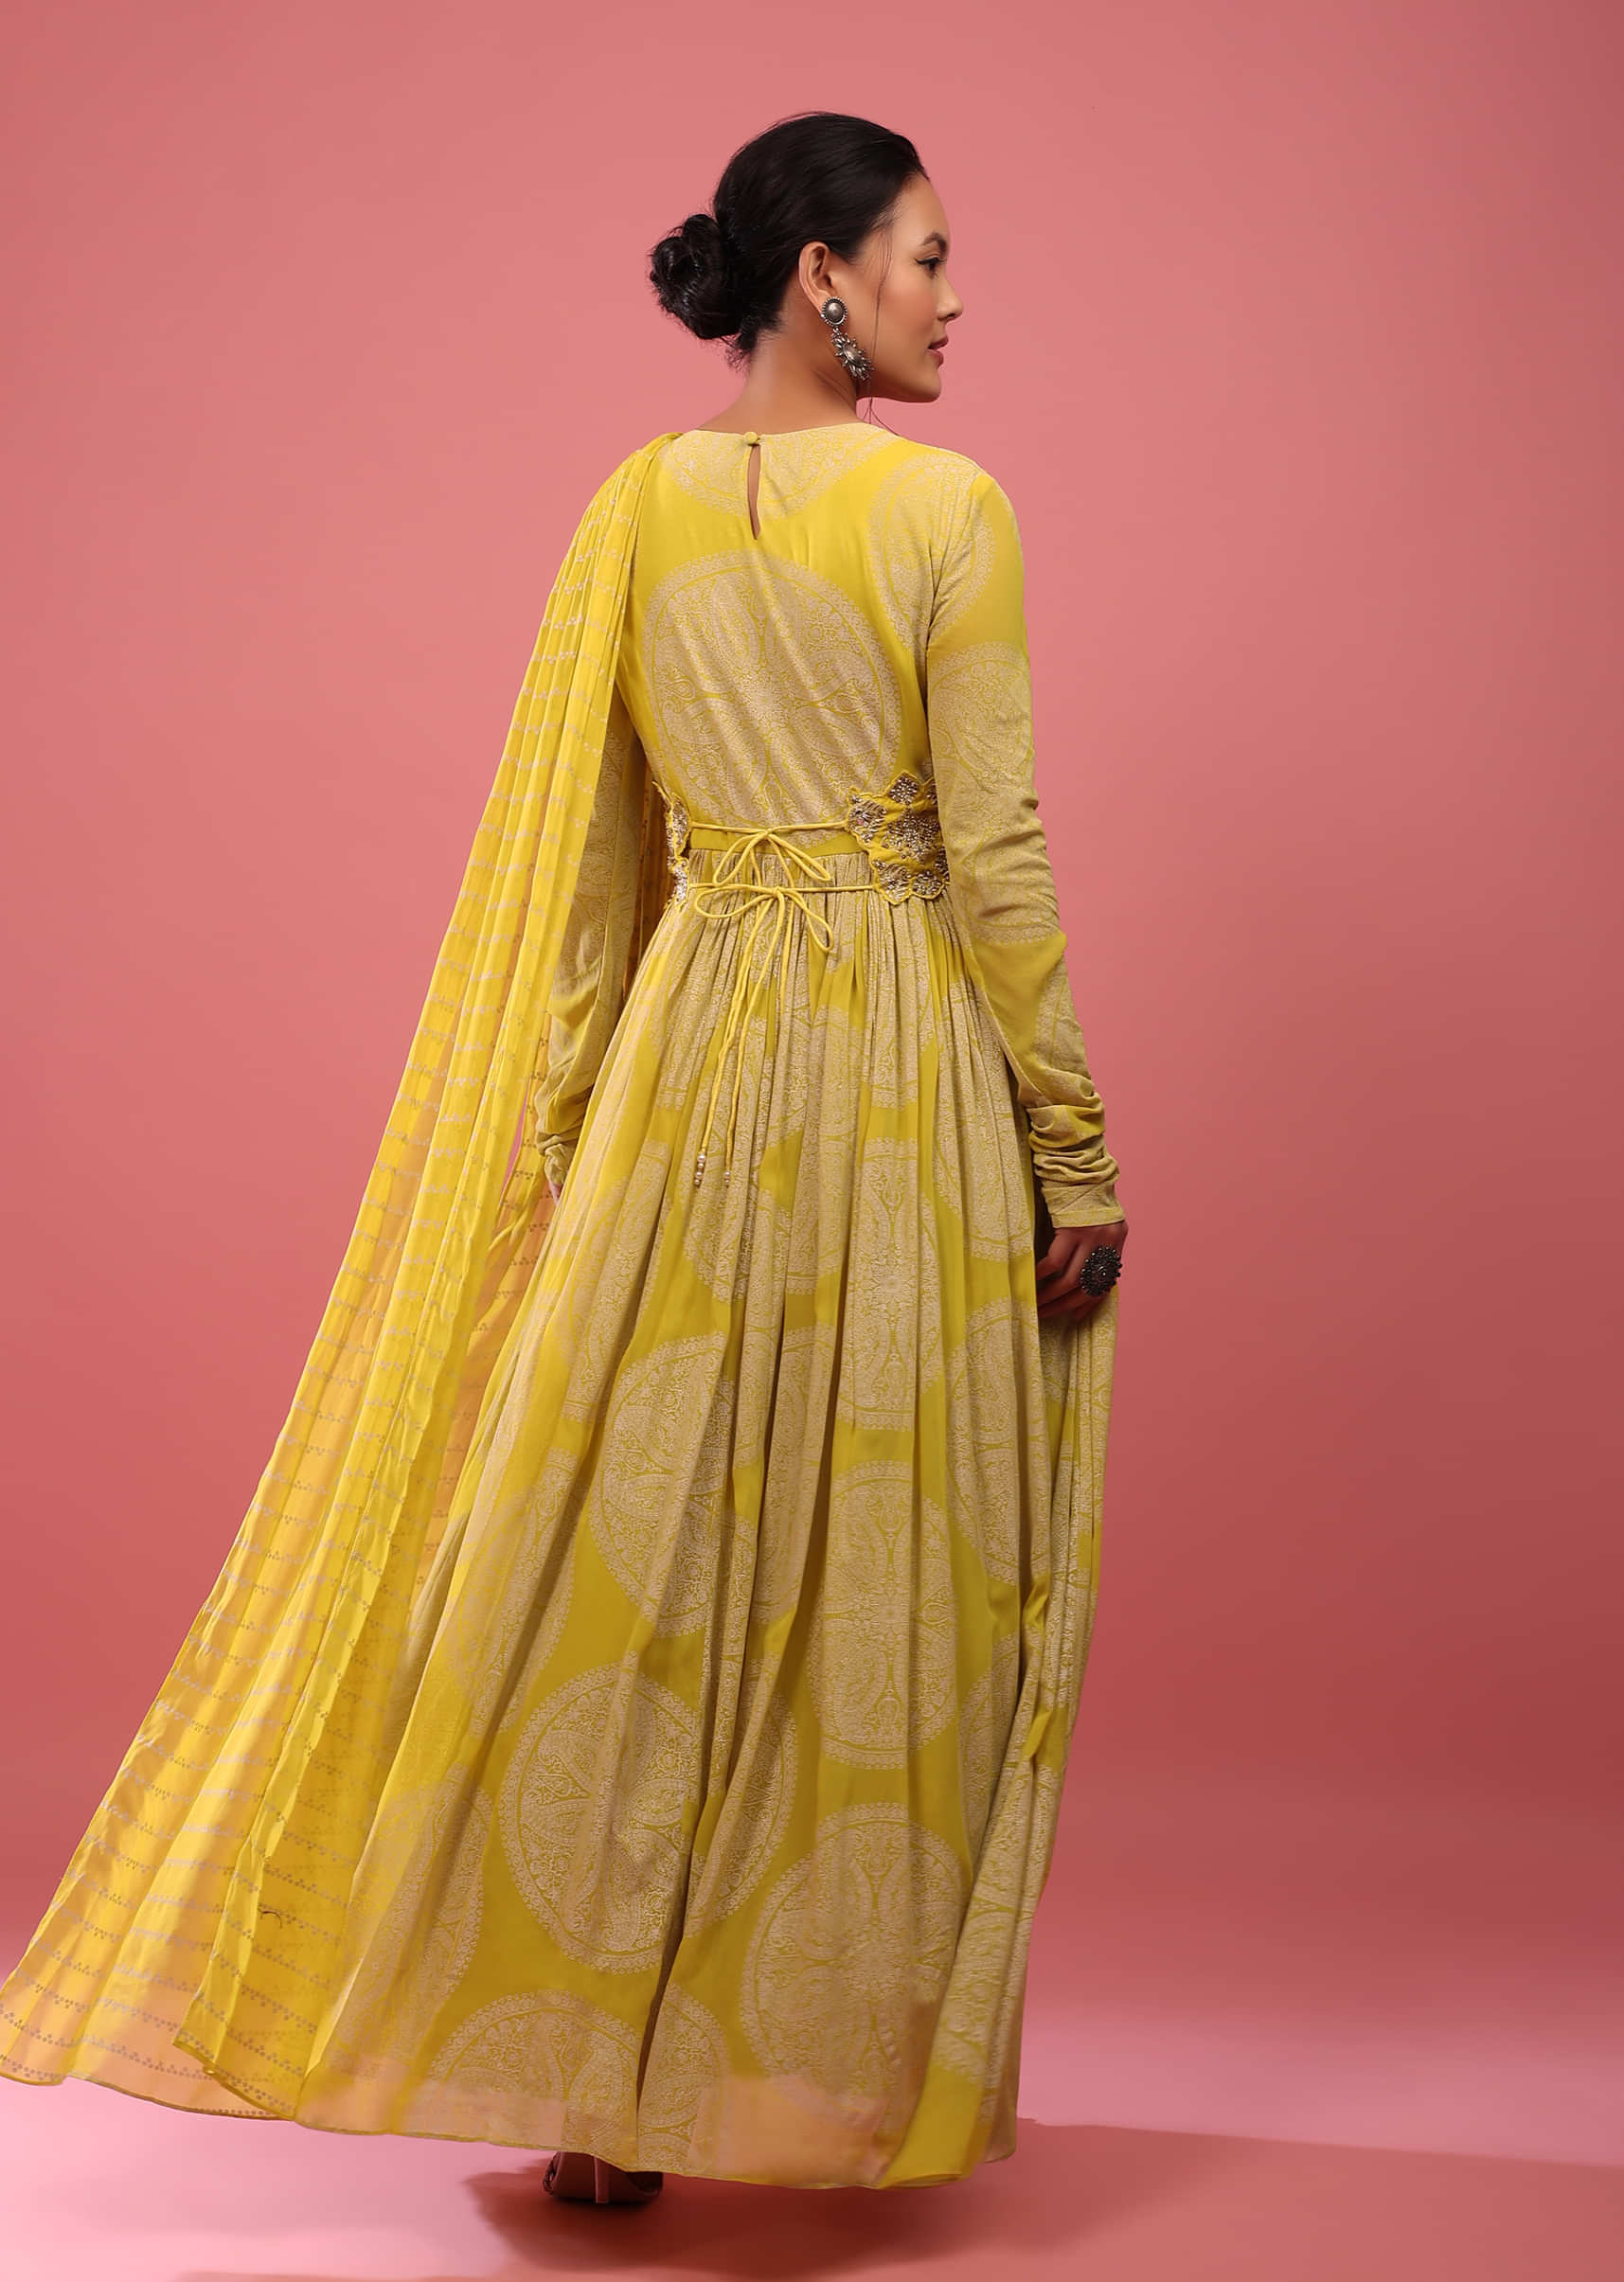 Canary Yellow Anarkali Suit In Georgette With Attached Dupatta And Floral Embroidered Waistbelt